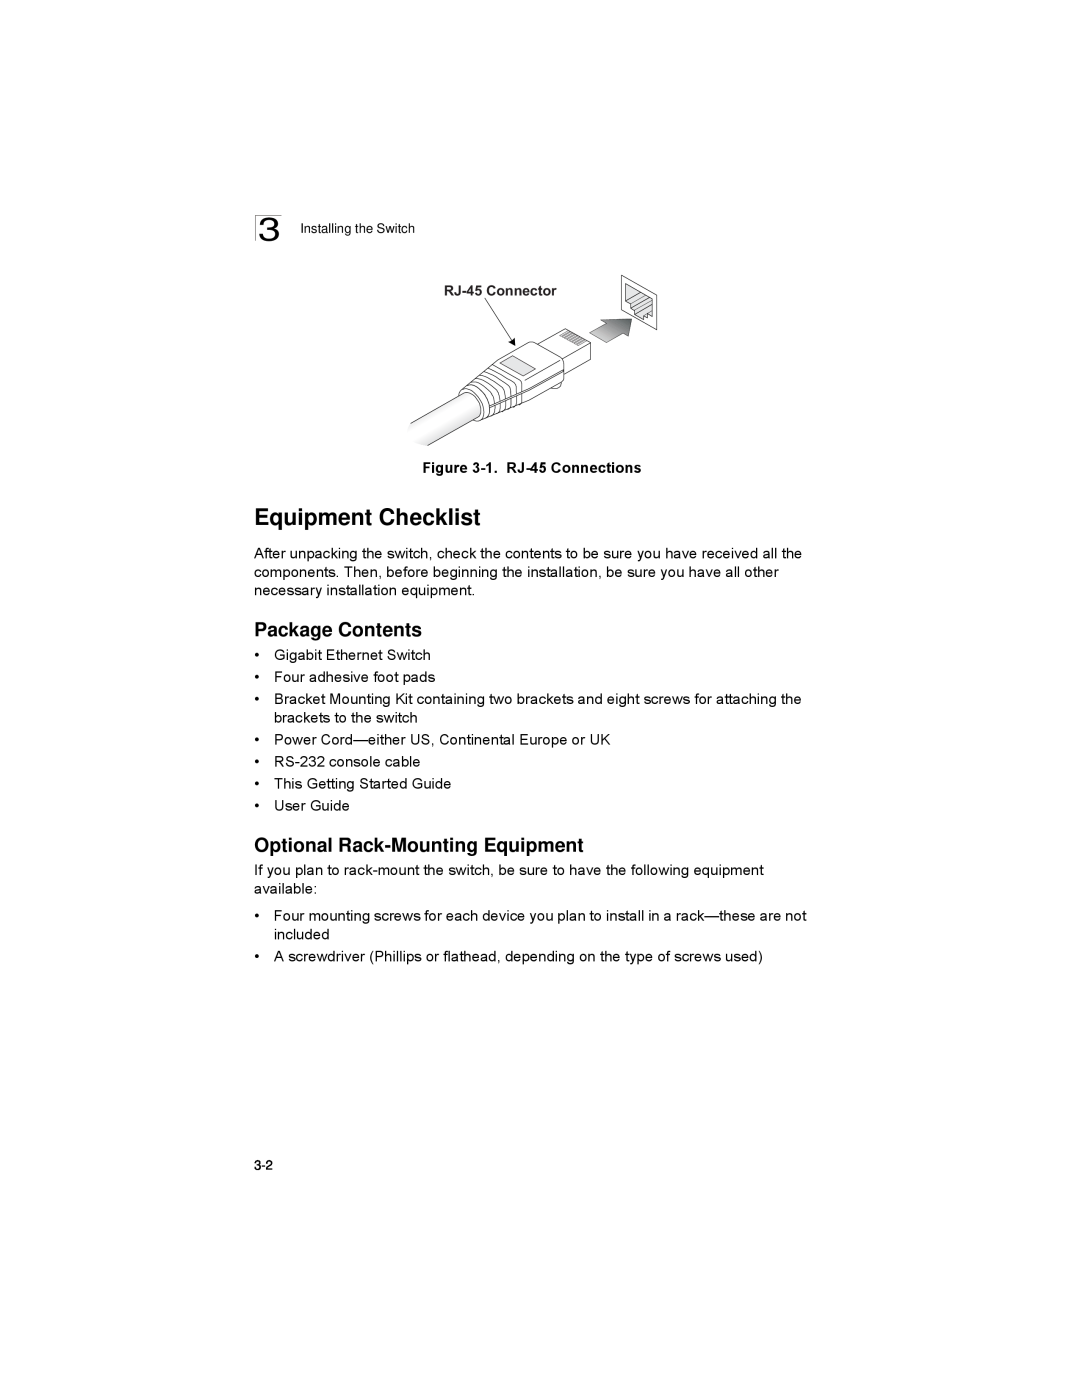 Alcatel-Lucent 6300-24 manual Equipment Checklist, Package Contents, Optional Rack-Mounting Equipment, RJ-45 Connector 